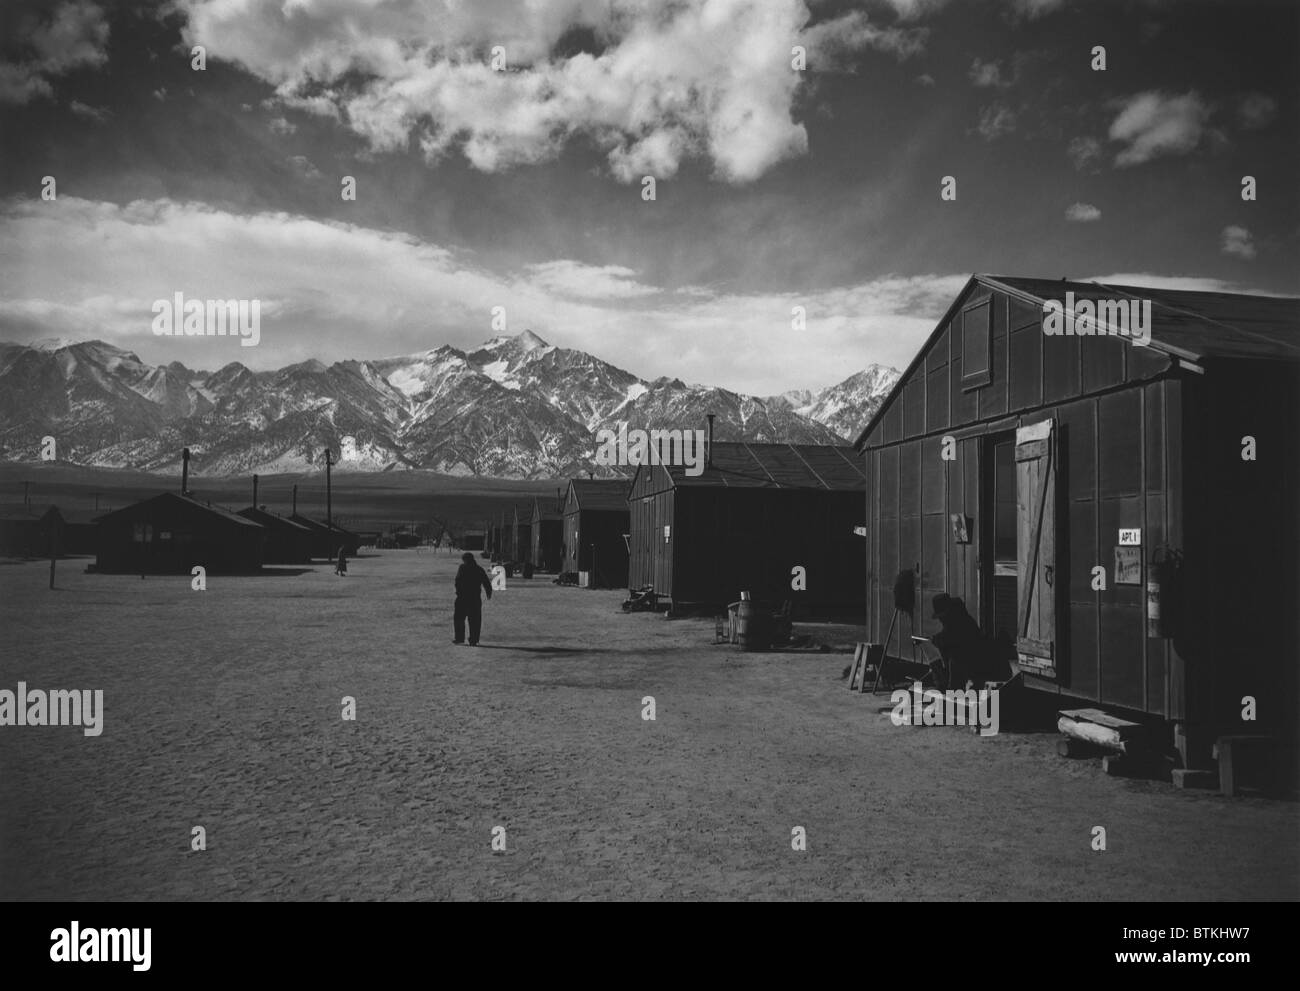 Manzanar Relocation Center, a World War II internment camp for Japanese Americans. A lone man walks on a barracks lined street in the winter of 1943. Photograph by Ansel Adams. Stock Photo